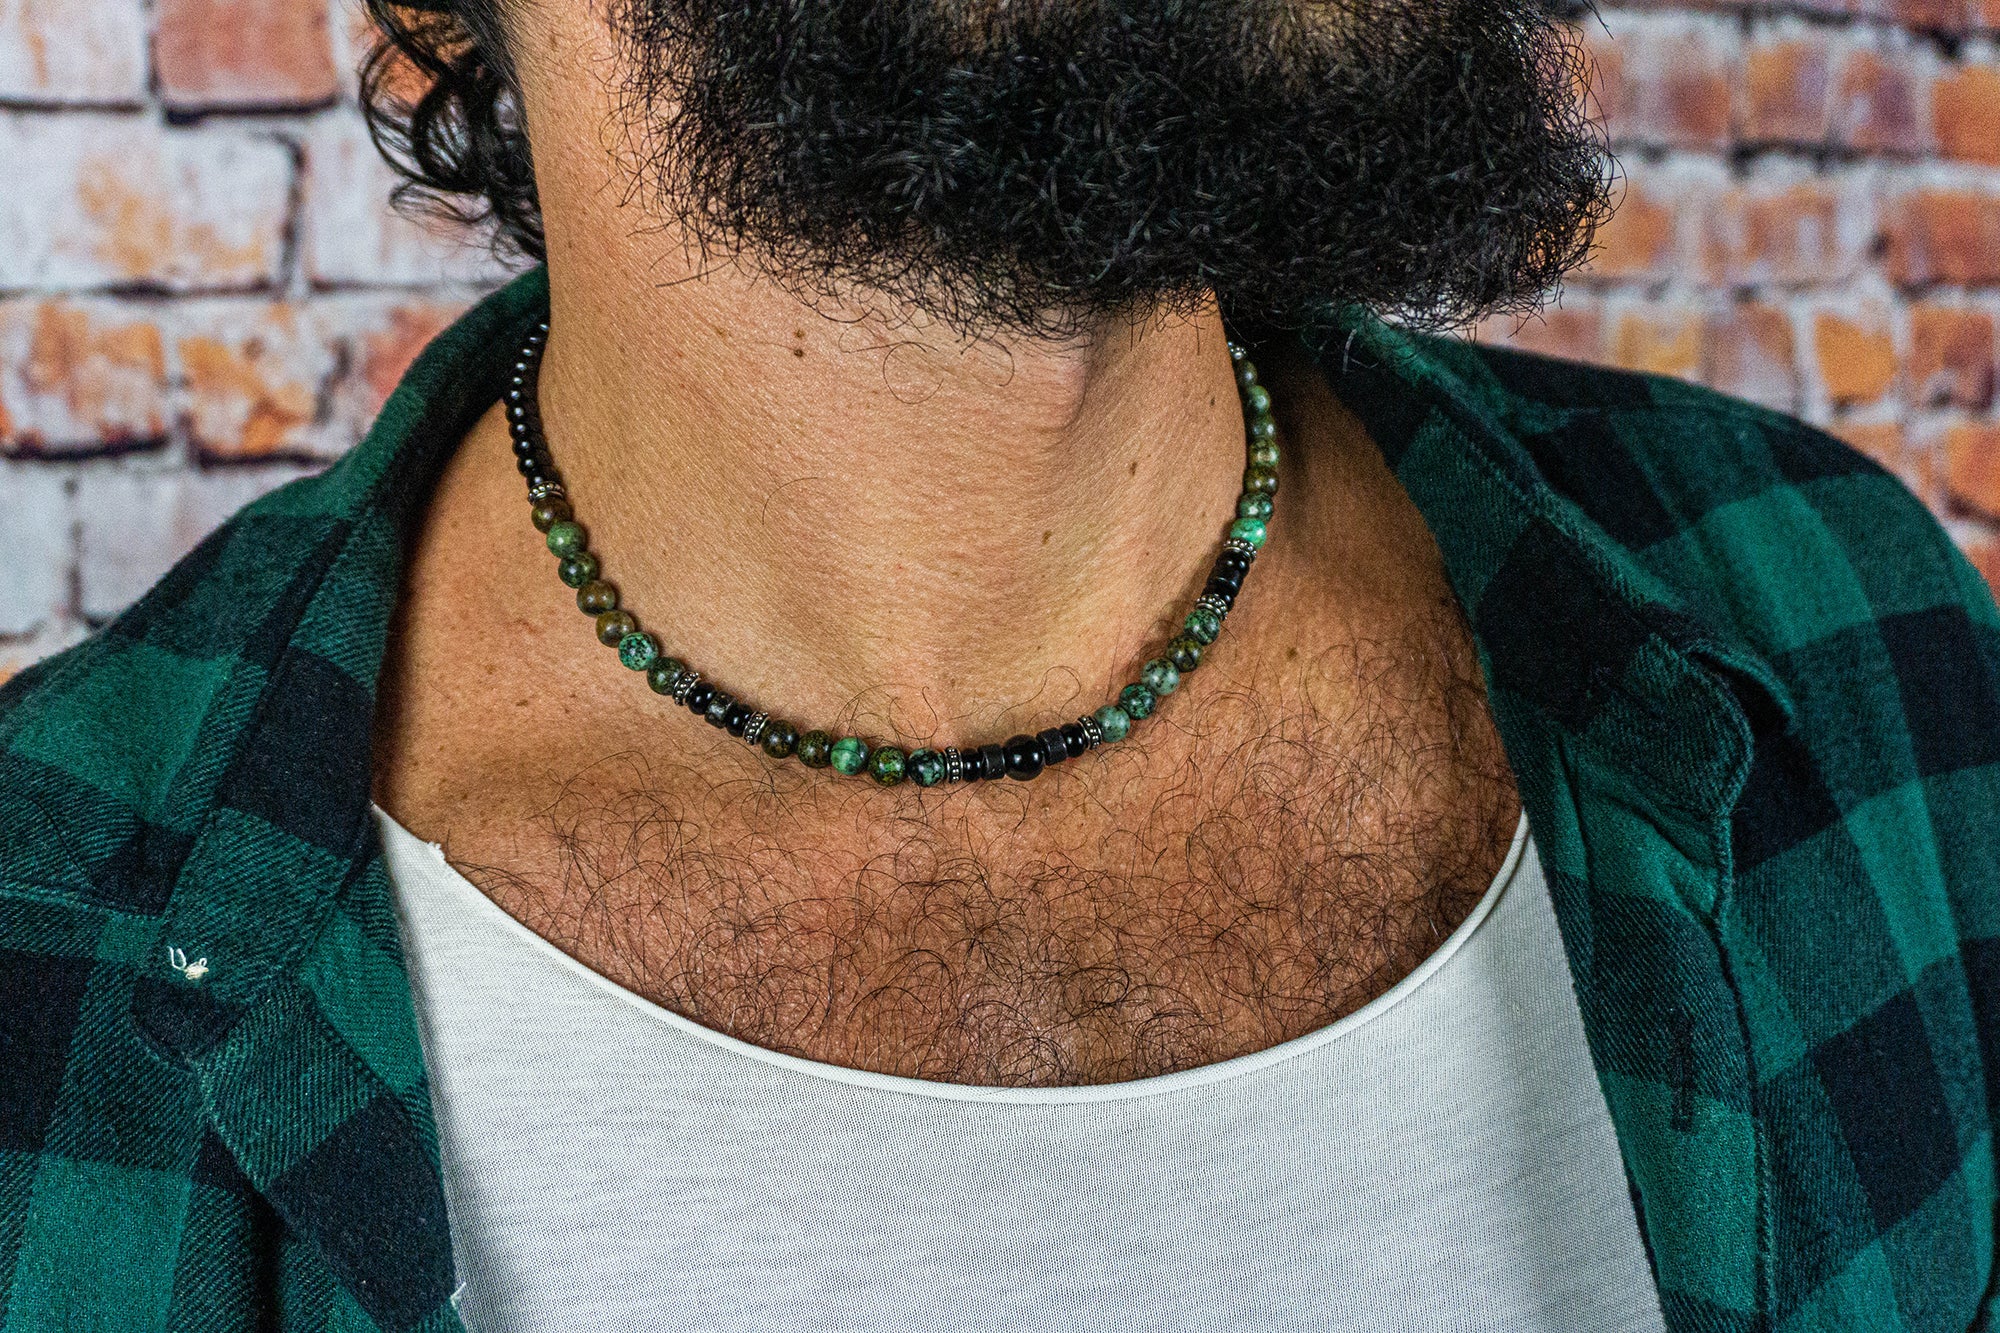 men waering a black and green gemstone beads choker necklace with some stainless steel details